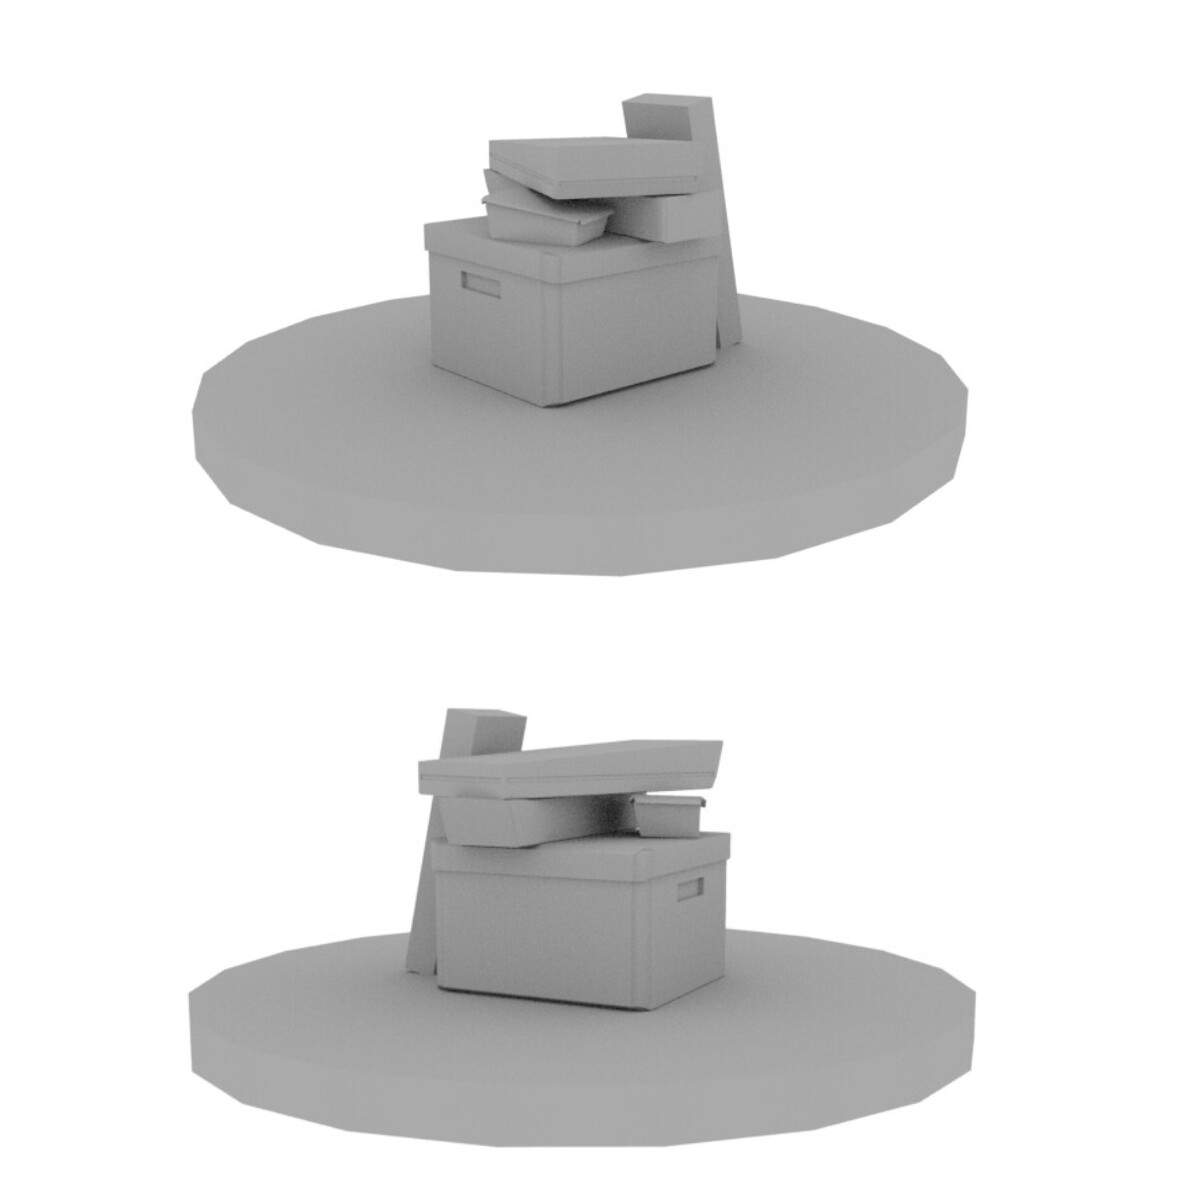 models of Boxes for university project 'Gamekid'